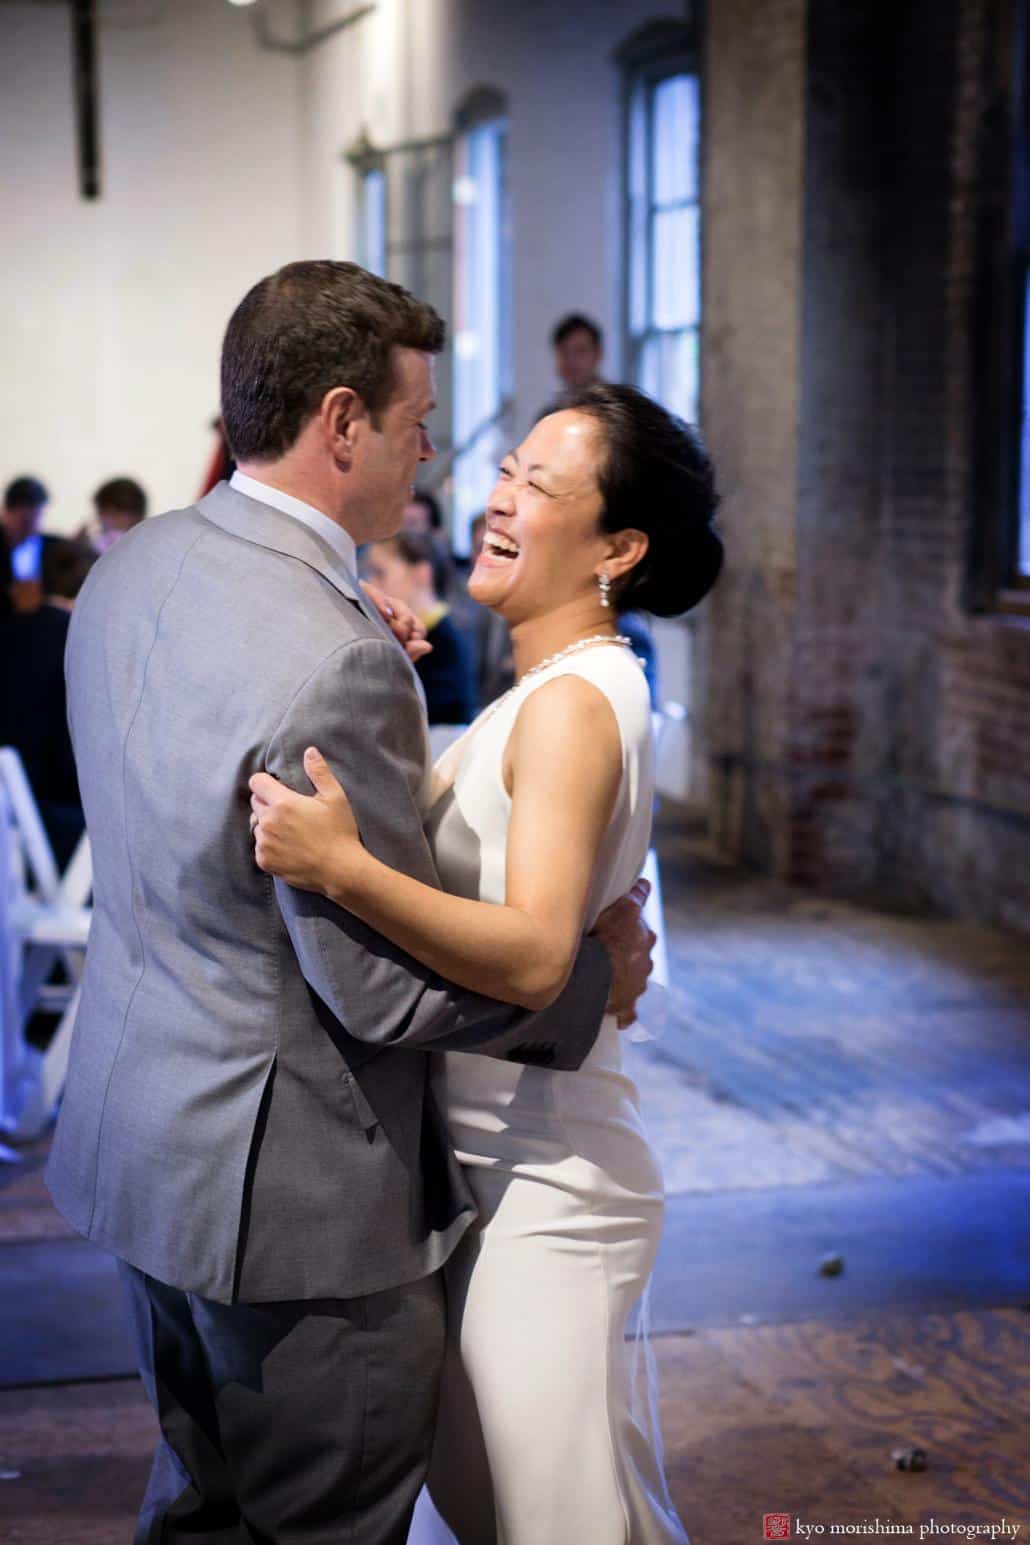 Bride and groom first dance at Invisible Dog wedding in Boerum Hill, photographed by Kyo Morishima